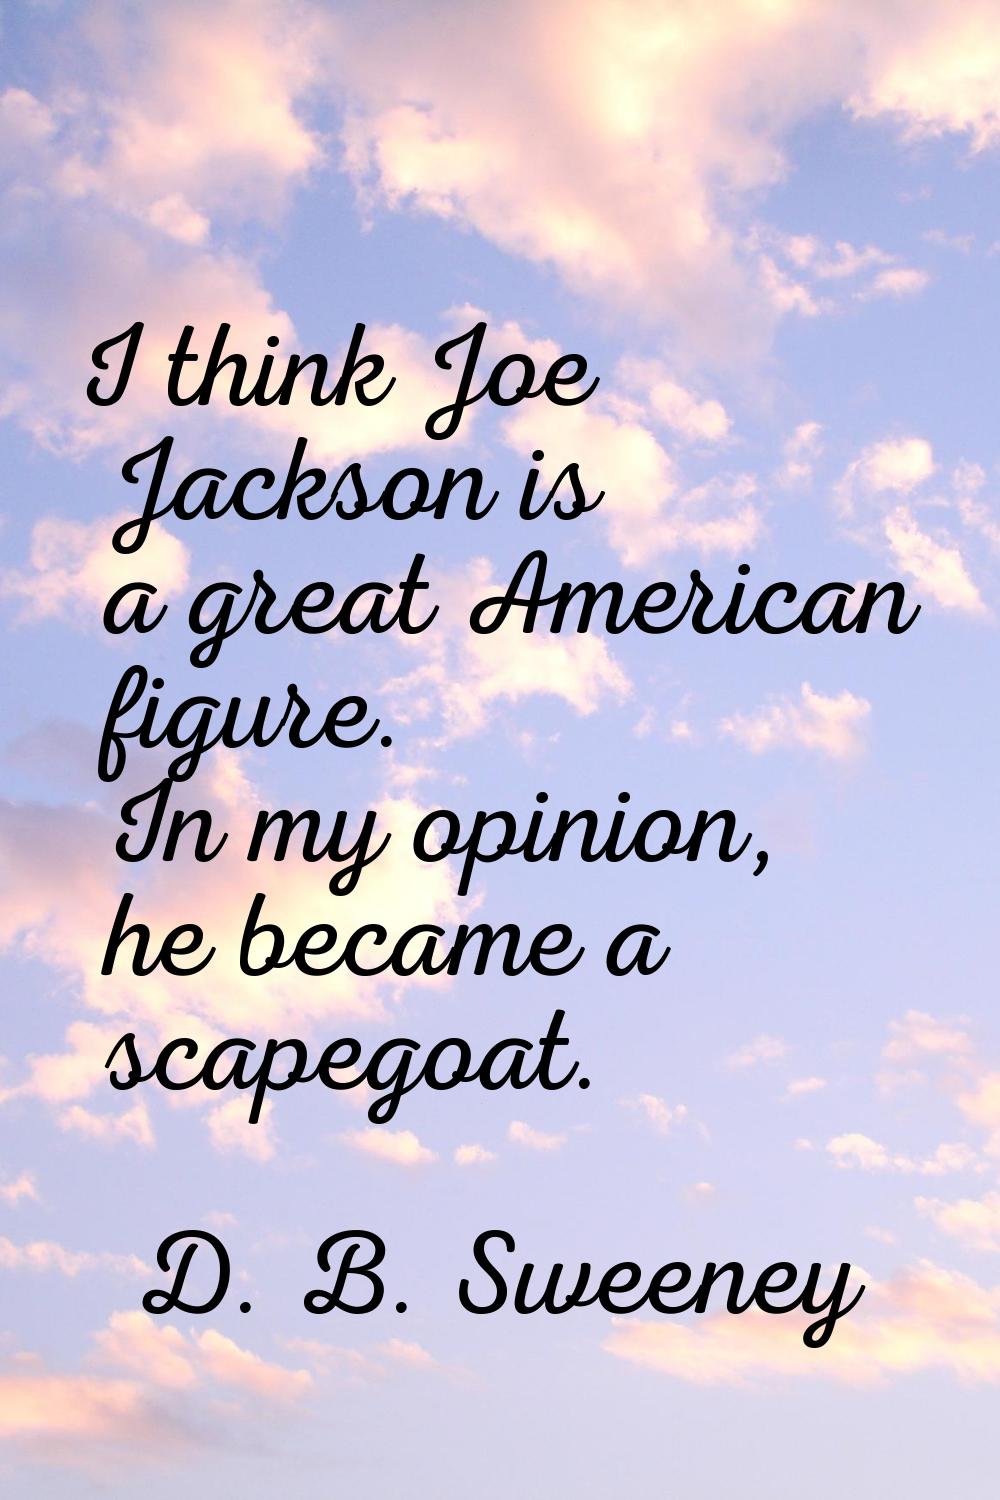 I think Joe Jackson is a great American figure. In my opinion, he became a scapegoat.